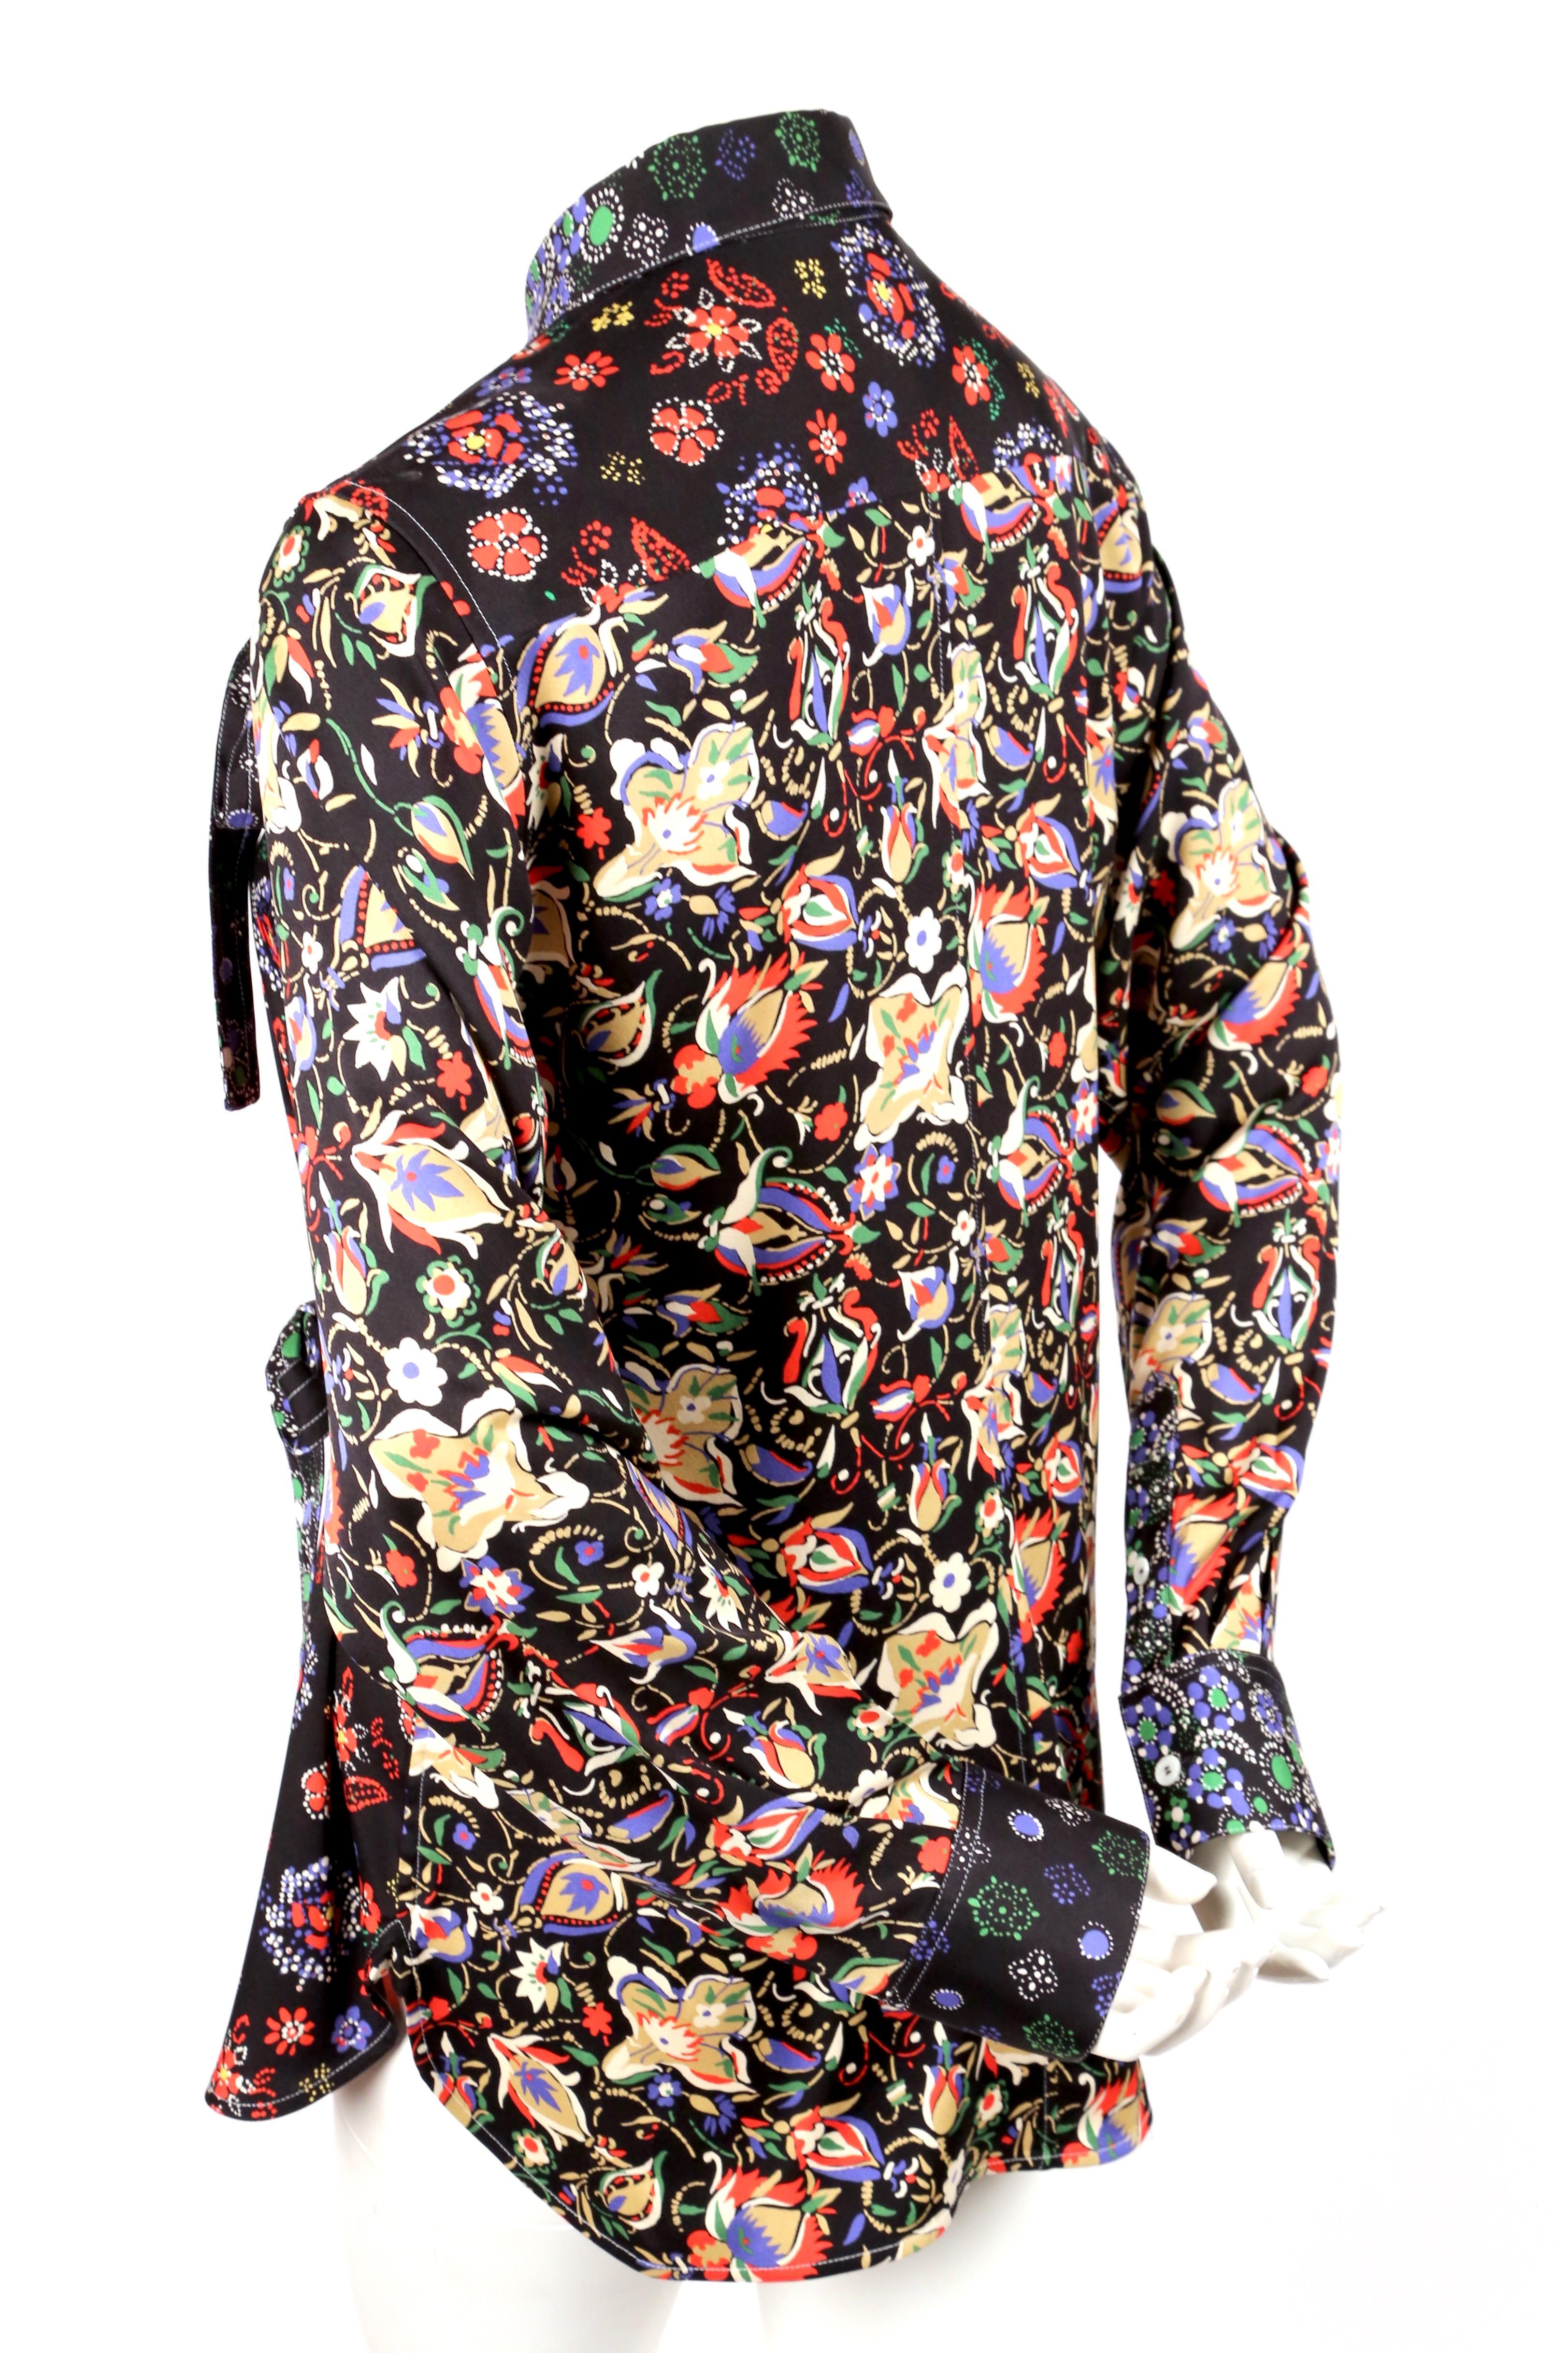 CELINE by PHOEBE PHILO floral printed silk shirt with ties In Excellent Condition In San Fransisco, CA